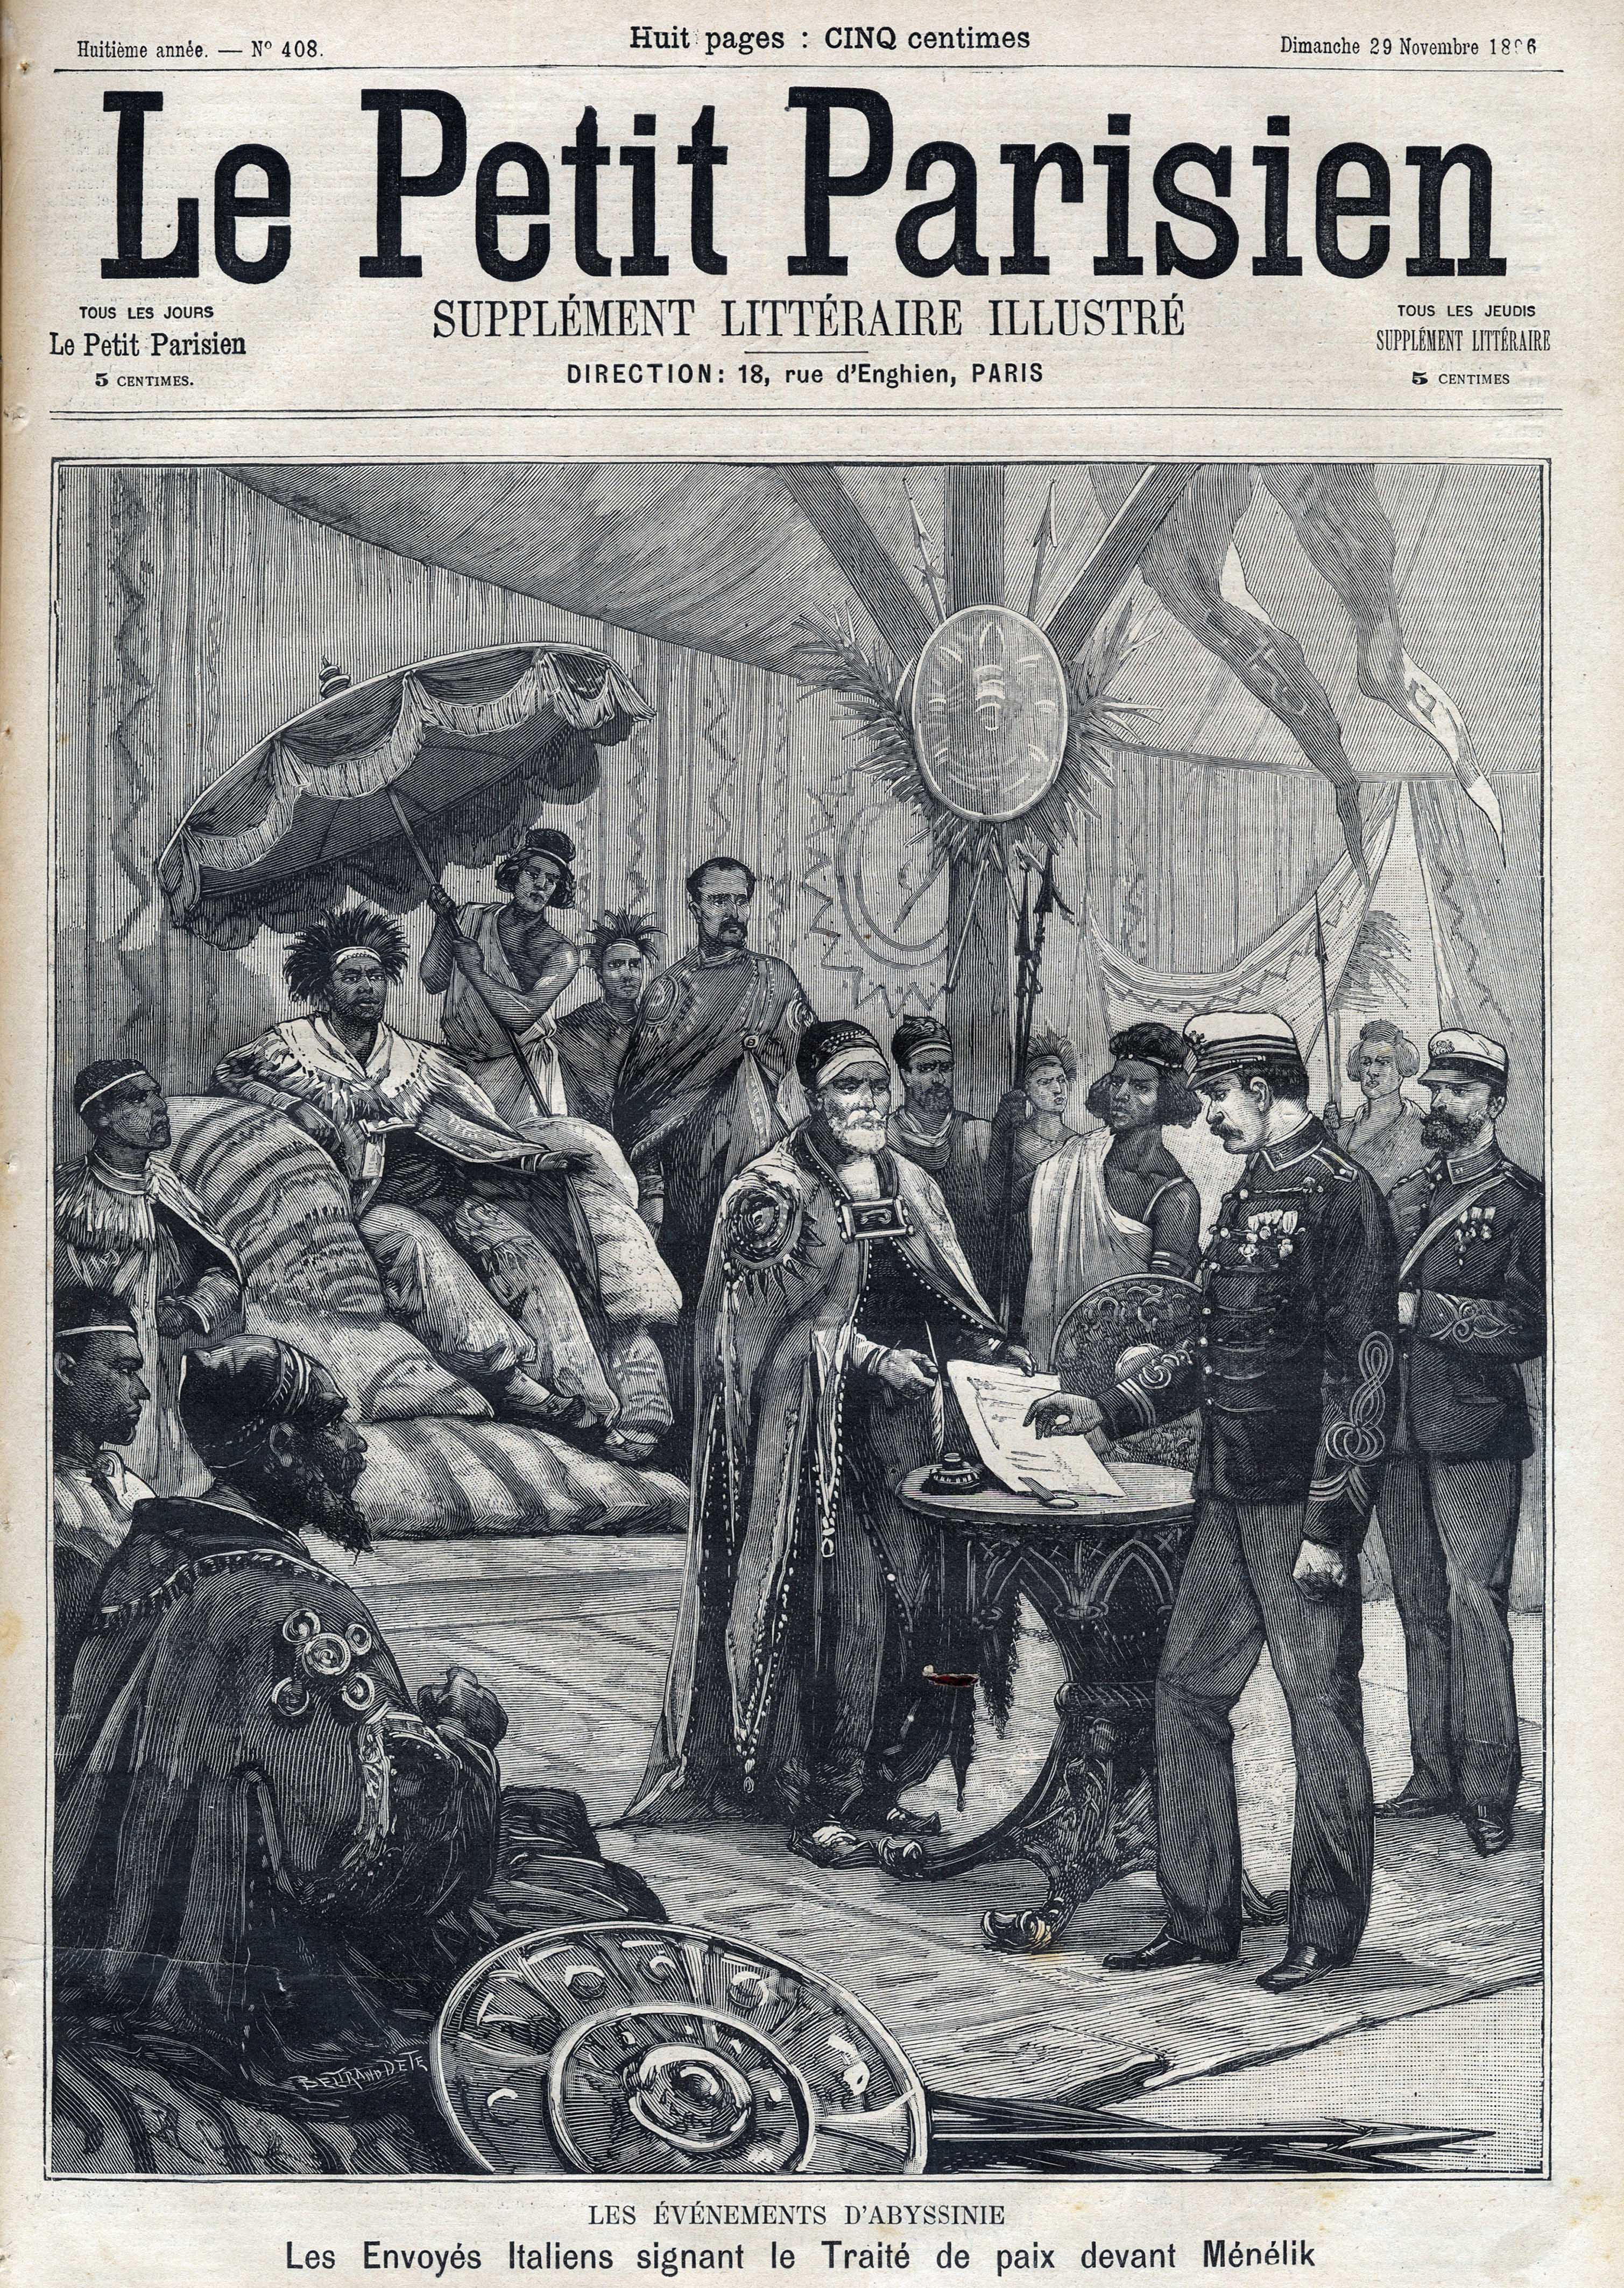 Italian representatives signing the peace treaty in front of Emperor Menelik II of Ethiopia, Frontpage of French newspaper Le Petit Parisien, 1896, Private Collection [File: Leemage/Getty Images]